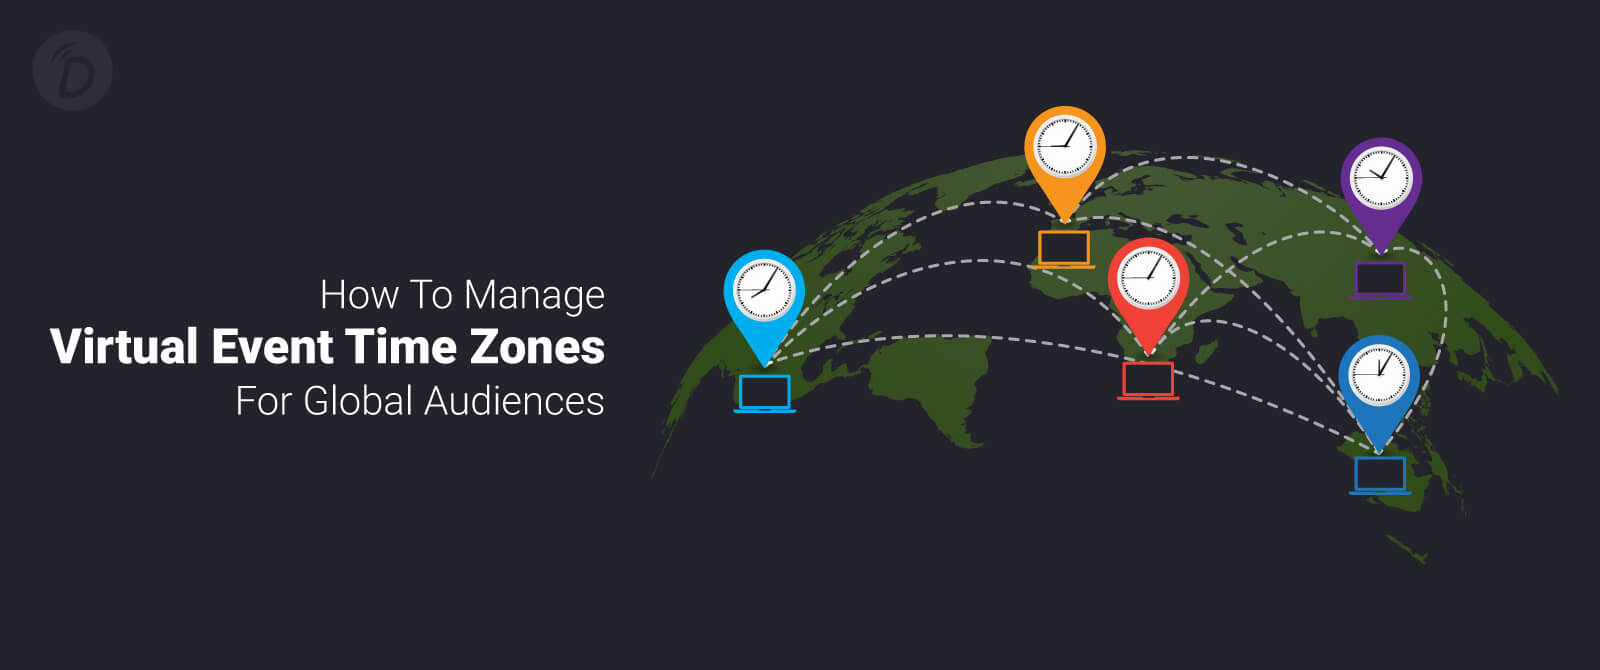 How to Manage Virtual Event Time Zones for Global Audiences